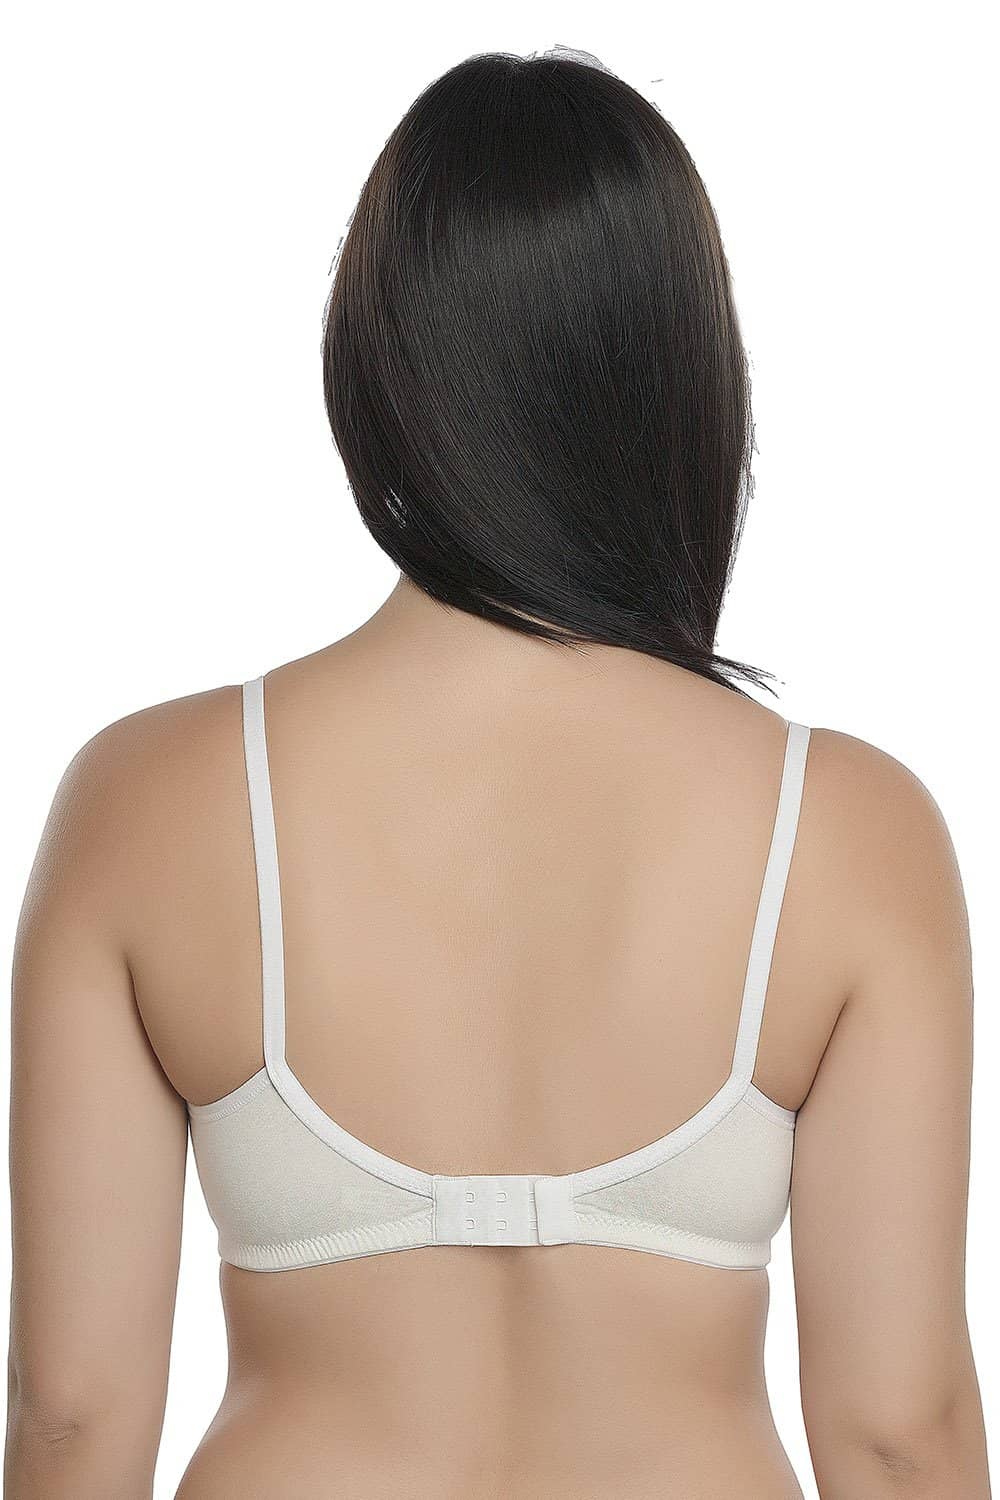 Organic Cotton Antimicrobial Seamless Triangular Bra with Supportive Stitch  (Pack of 2)-ISB099-Black_M.White